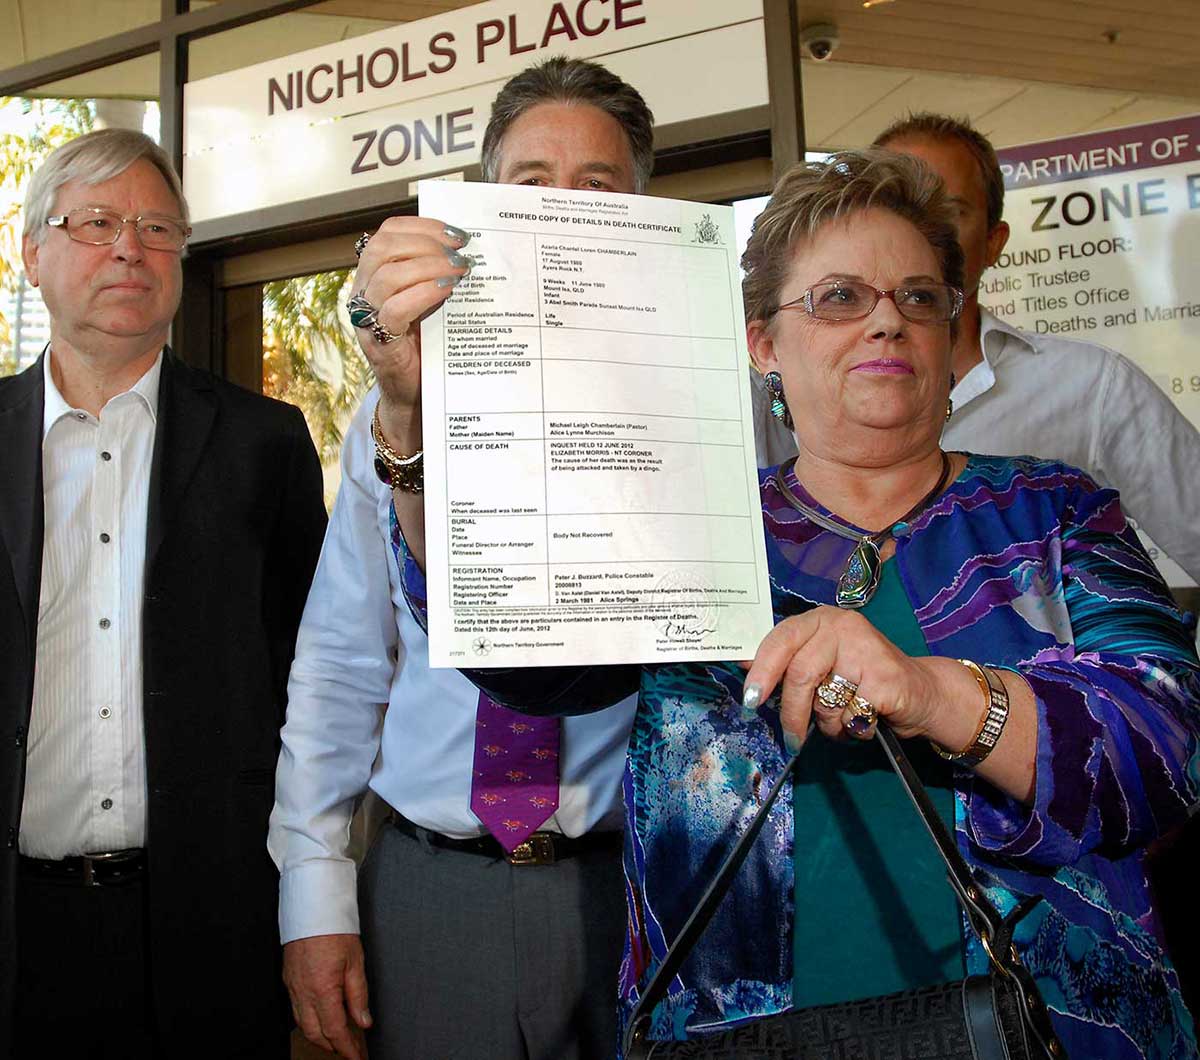 A woman standing outside of an office building is holding up an official document. A group of men in business suits stand behind her.